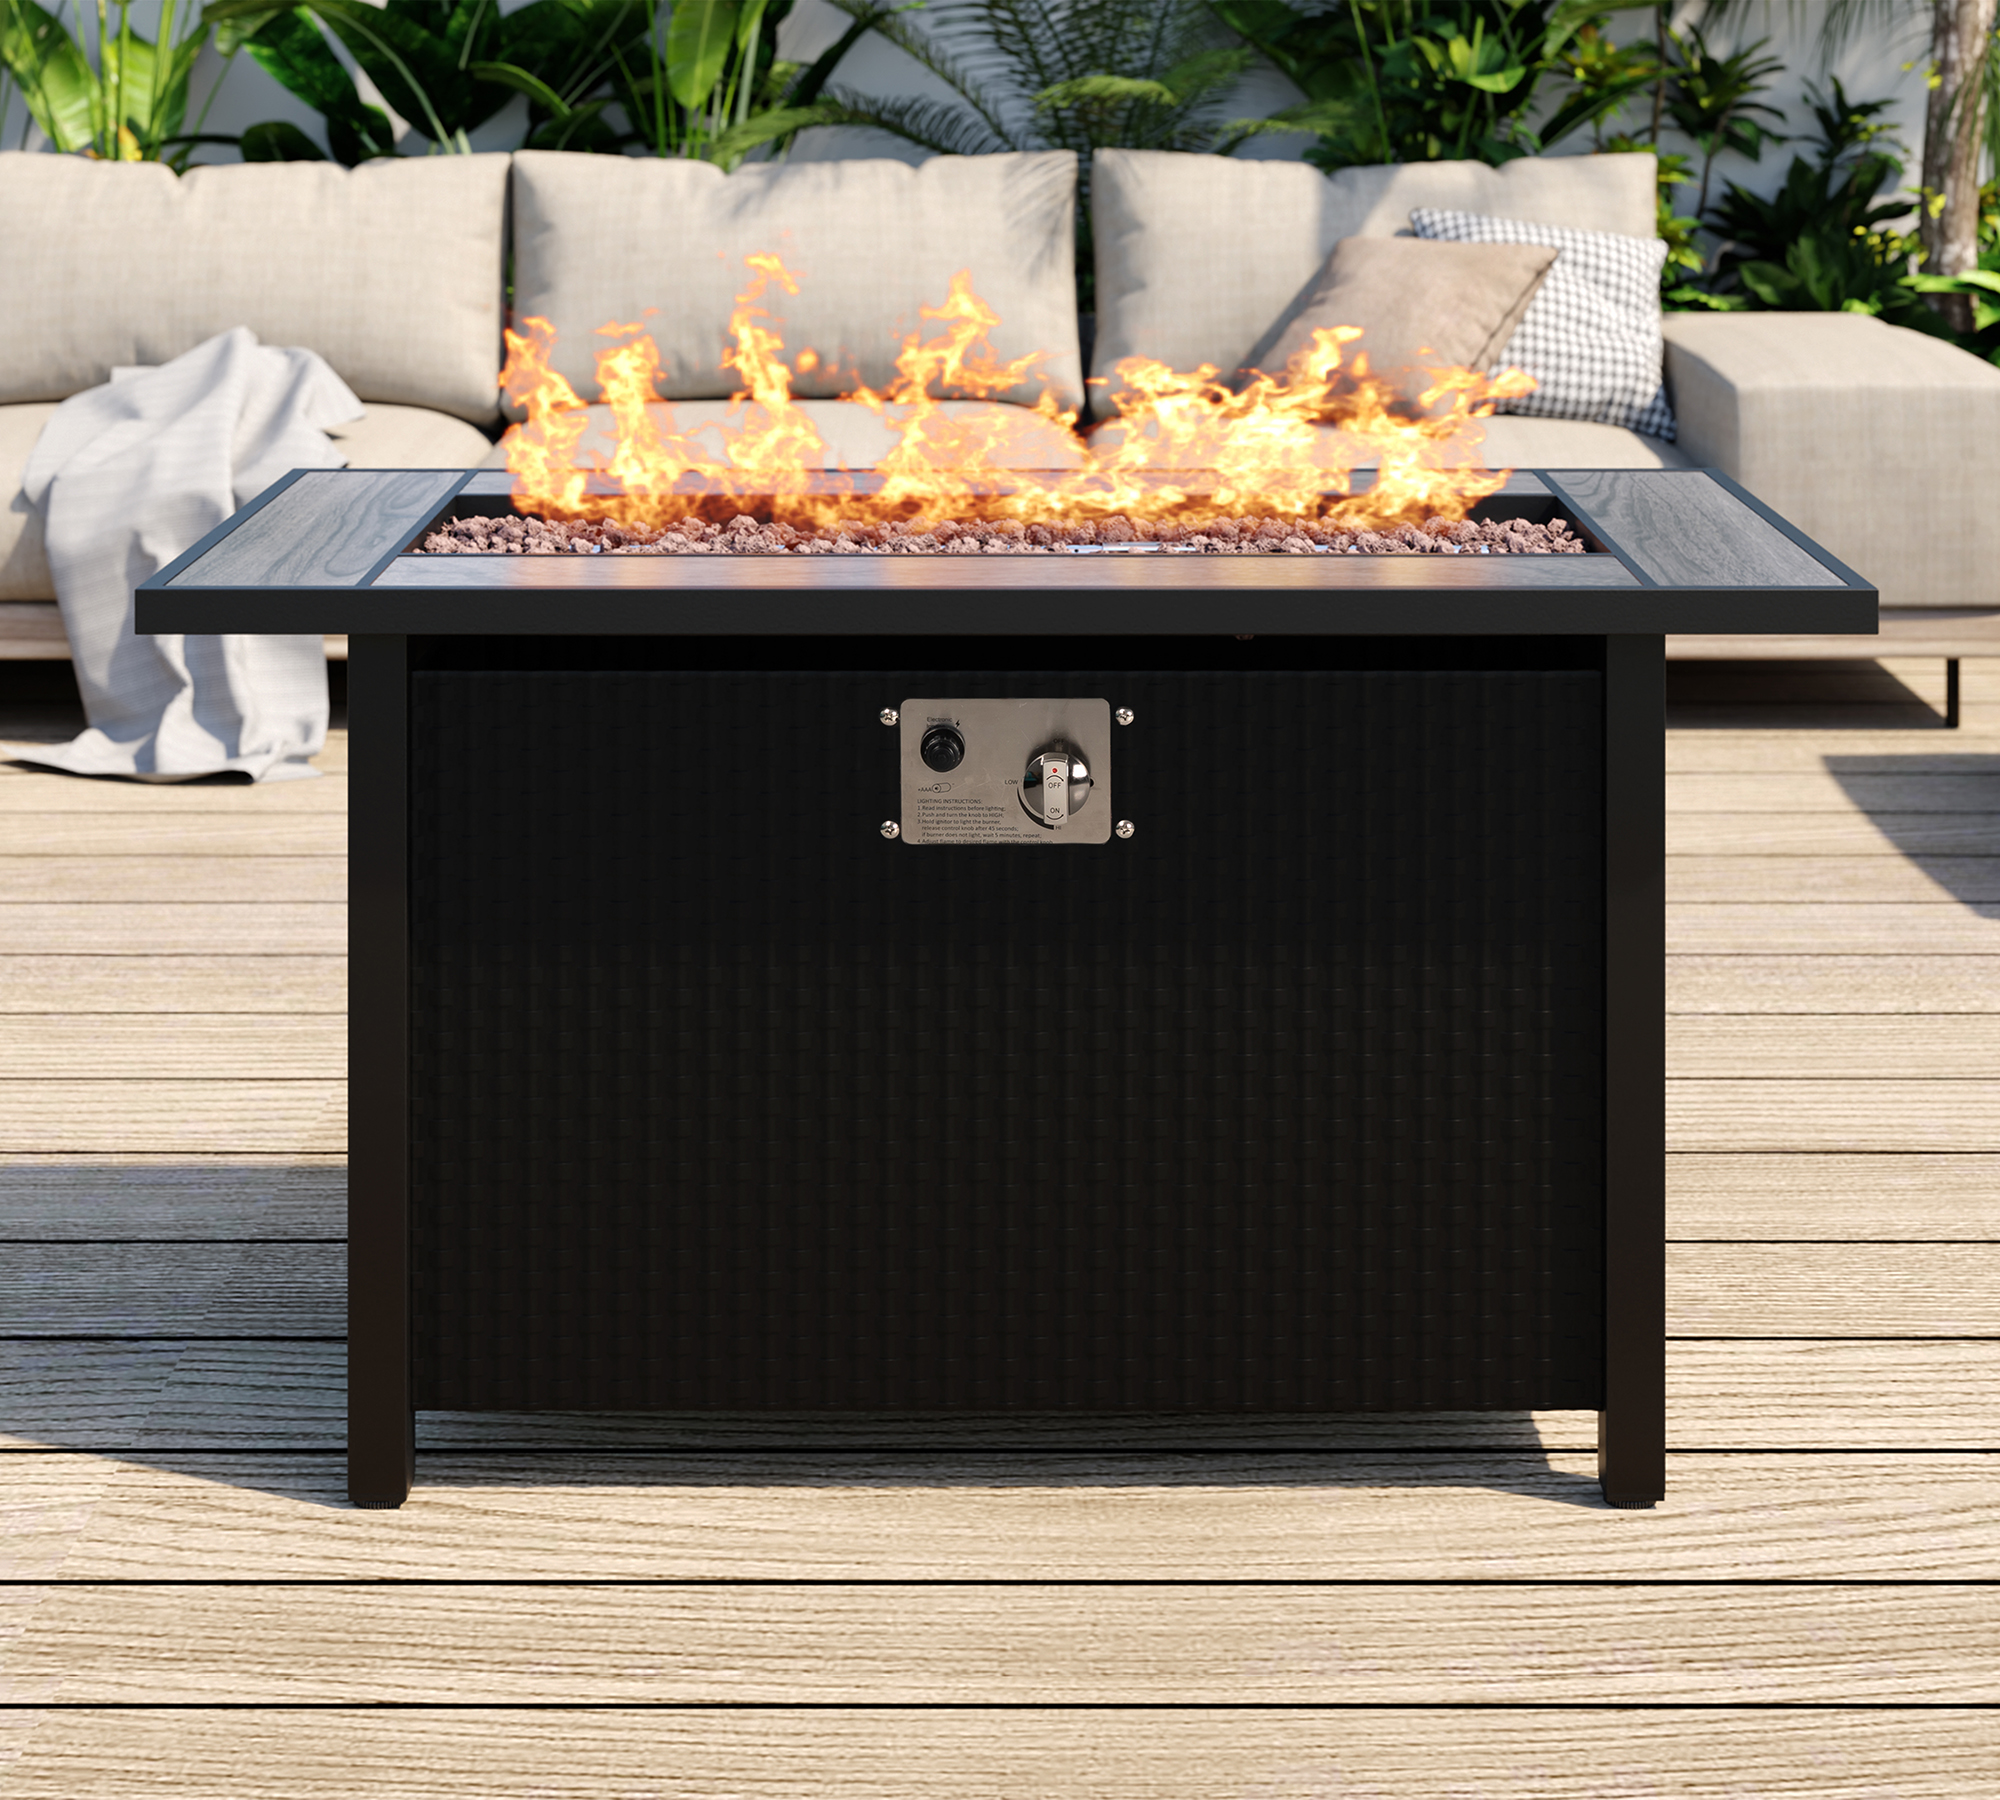 Walsunny 44.9" Gas Fire Pit Table 50000 BTU Propane with Removable Lid & Waterproof Cover with Lava Rock and Alumium Frame Tables(Grey) - image 4 of 8